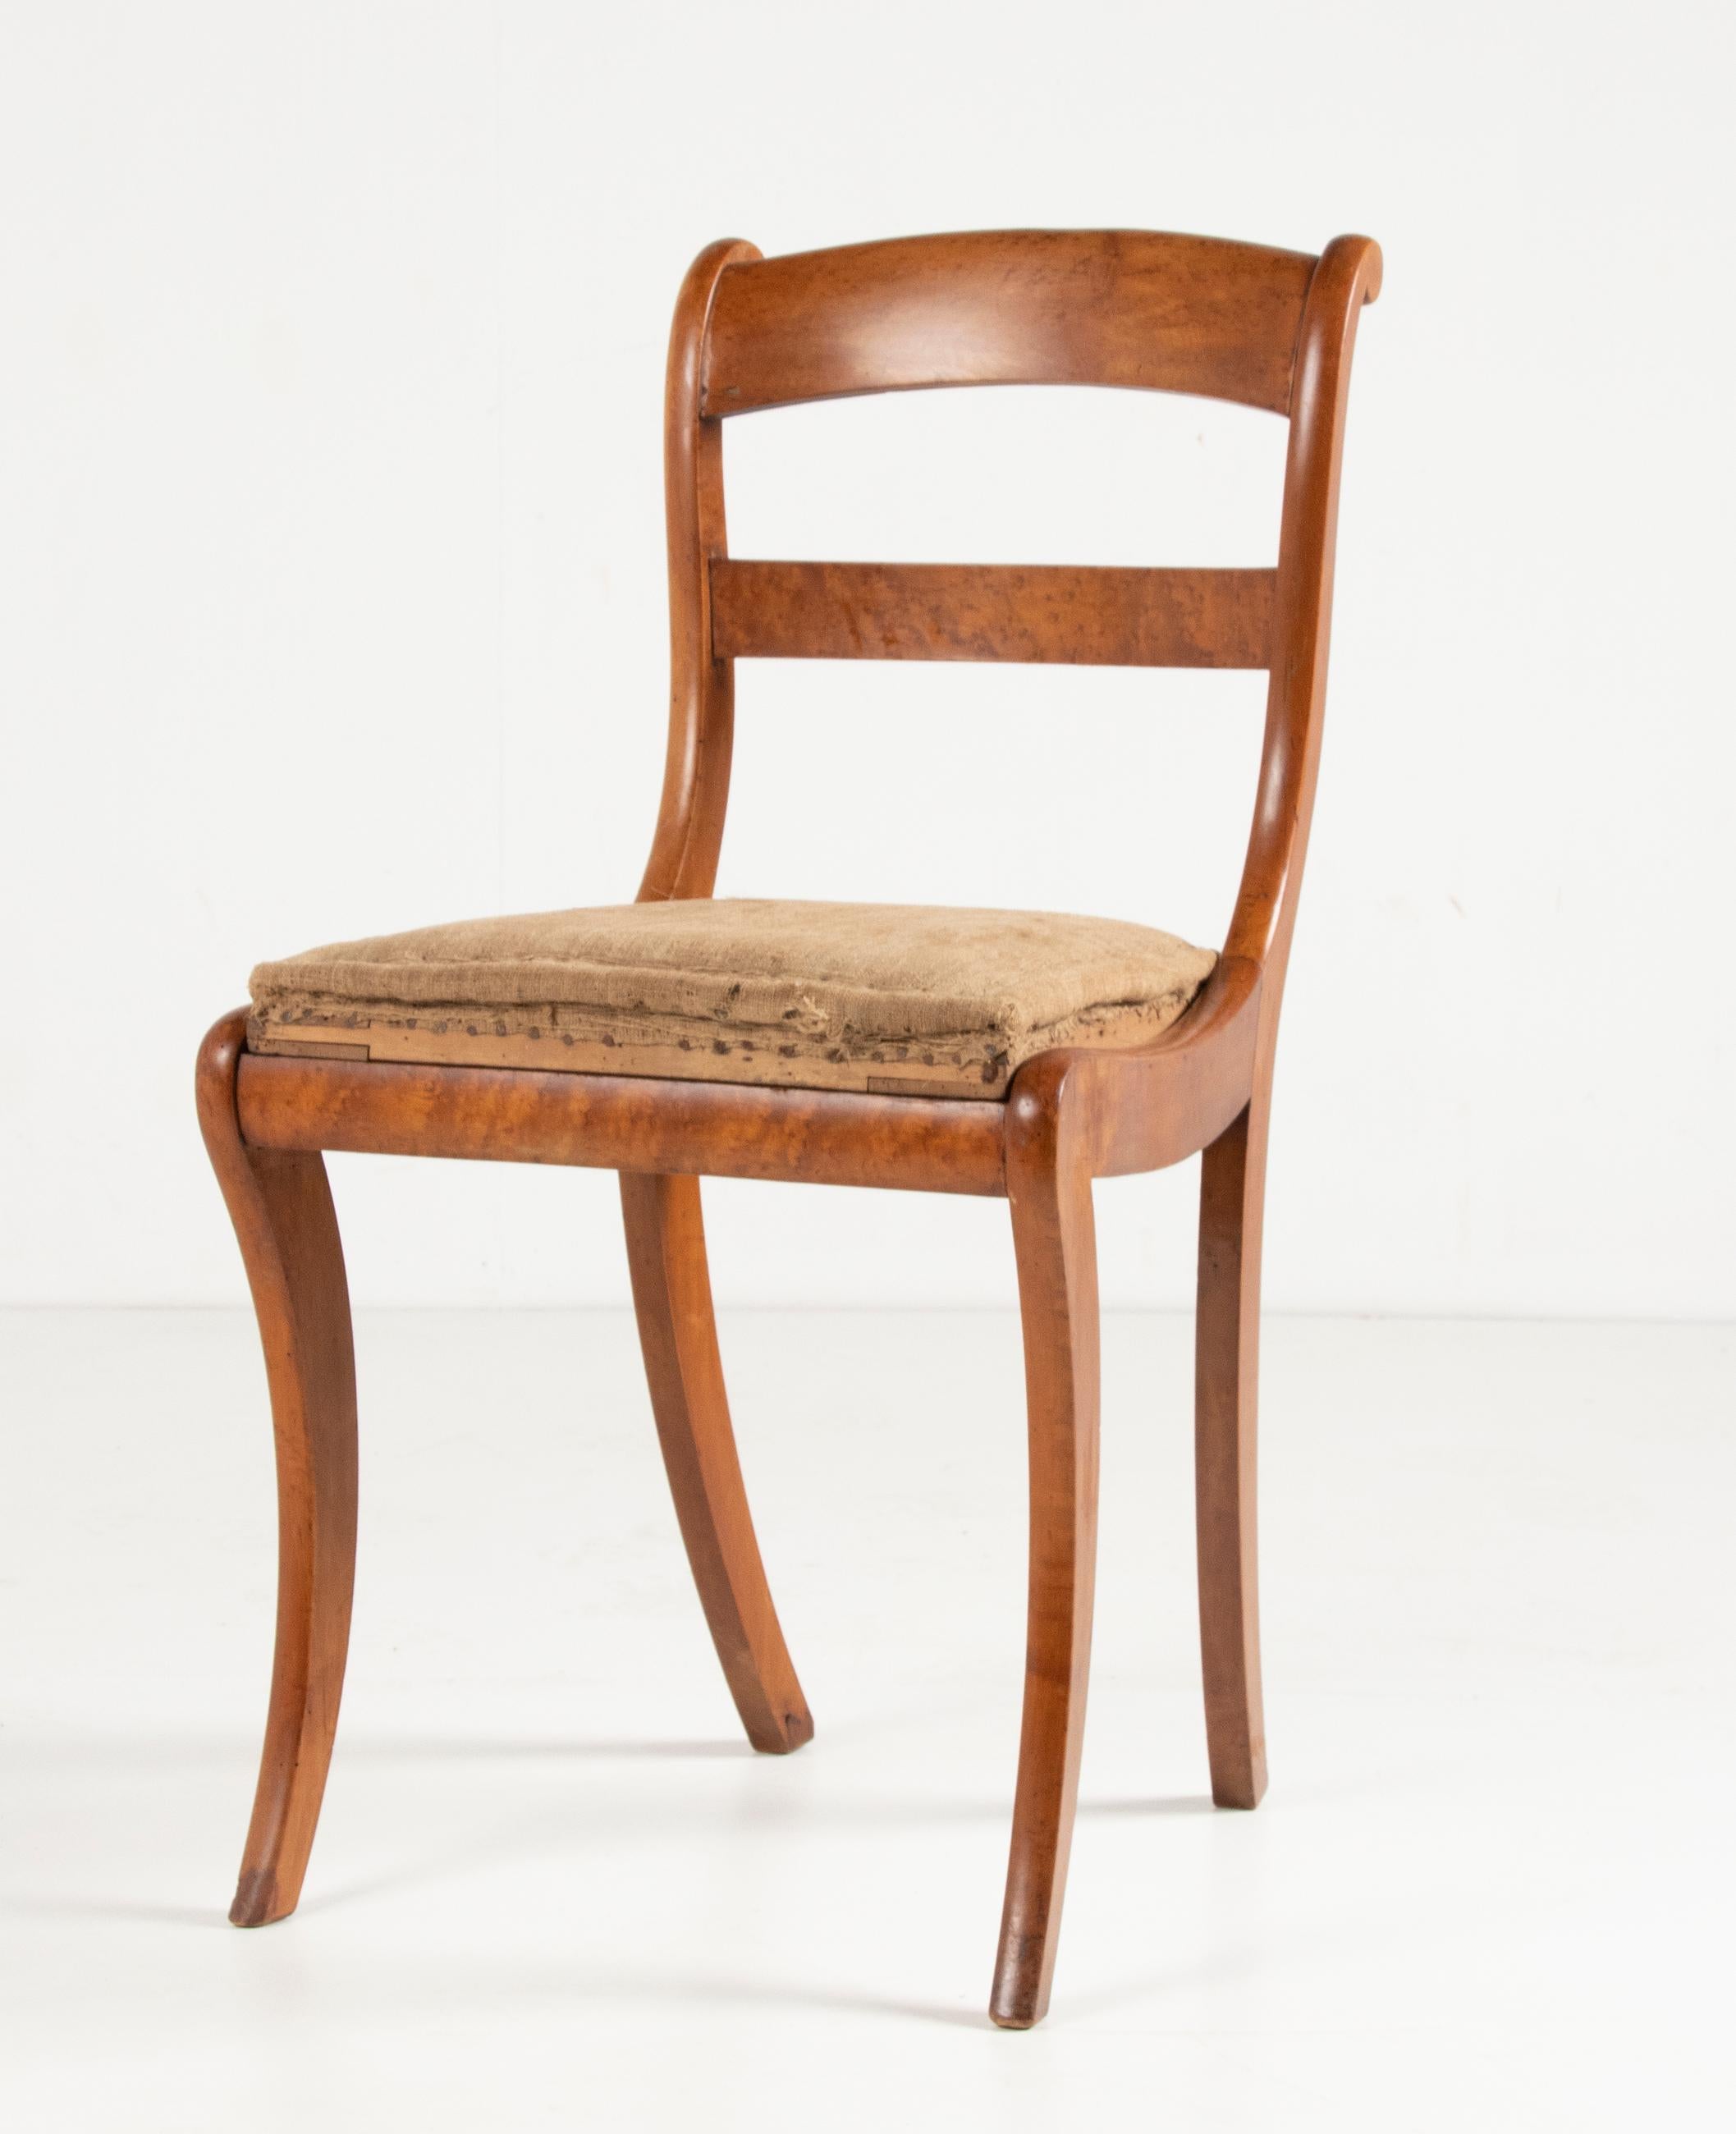 Early 19th Century Charles X Birds-Eye Maple Wood Dining Chairs For Sale 3